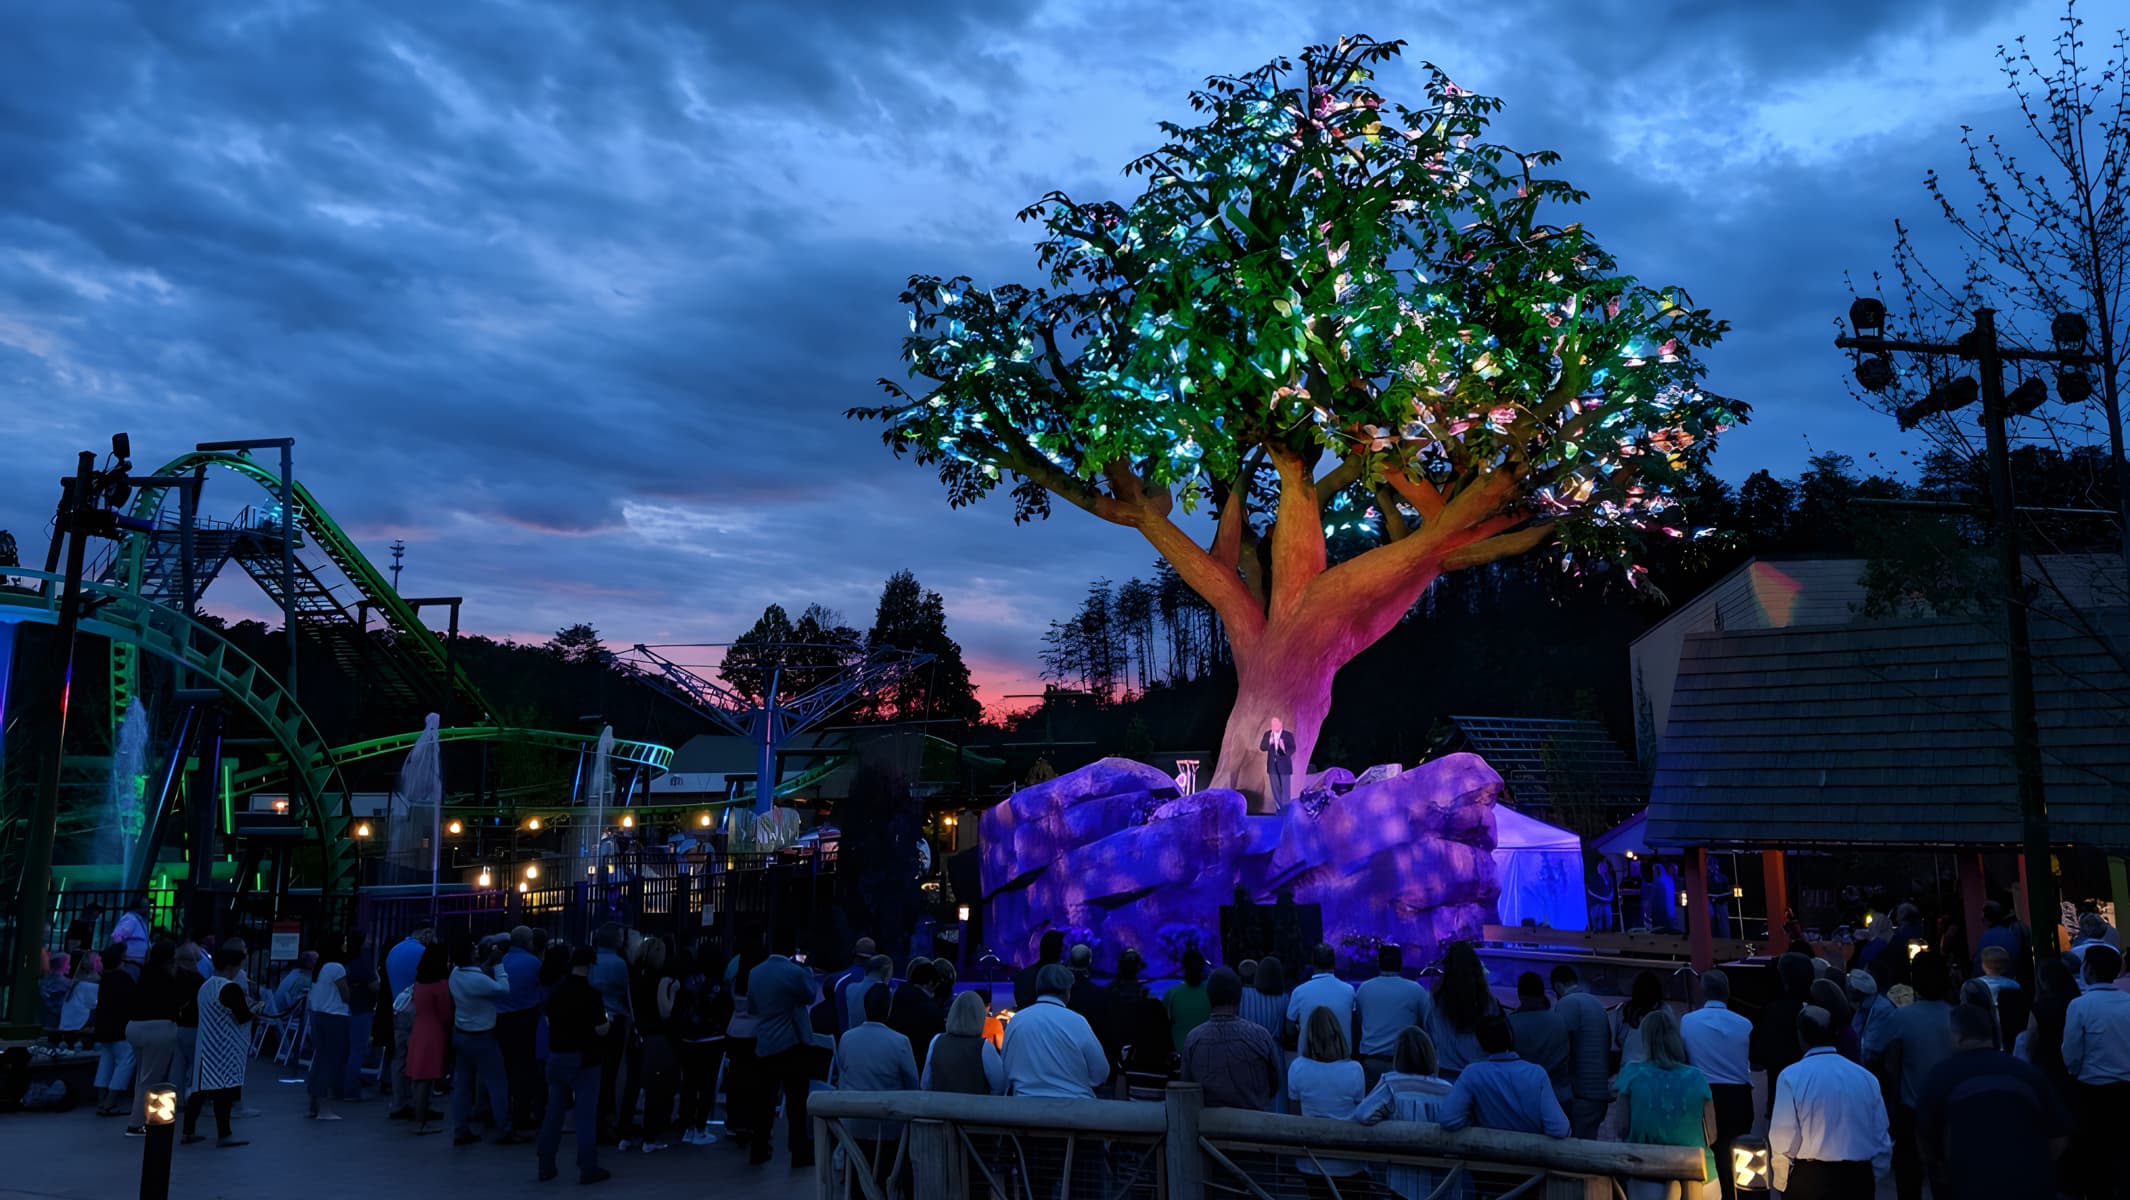 Dollywood tree lit up at sunset with large crowd of people